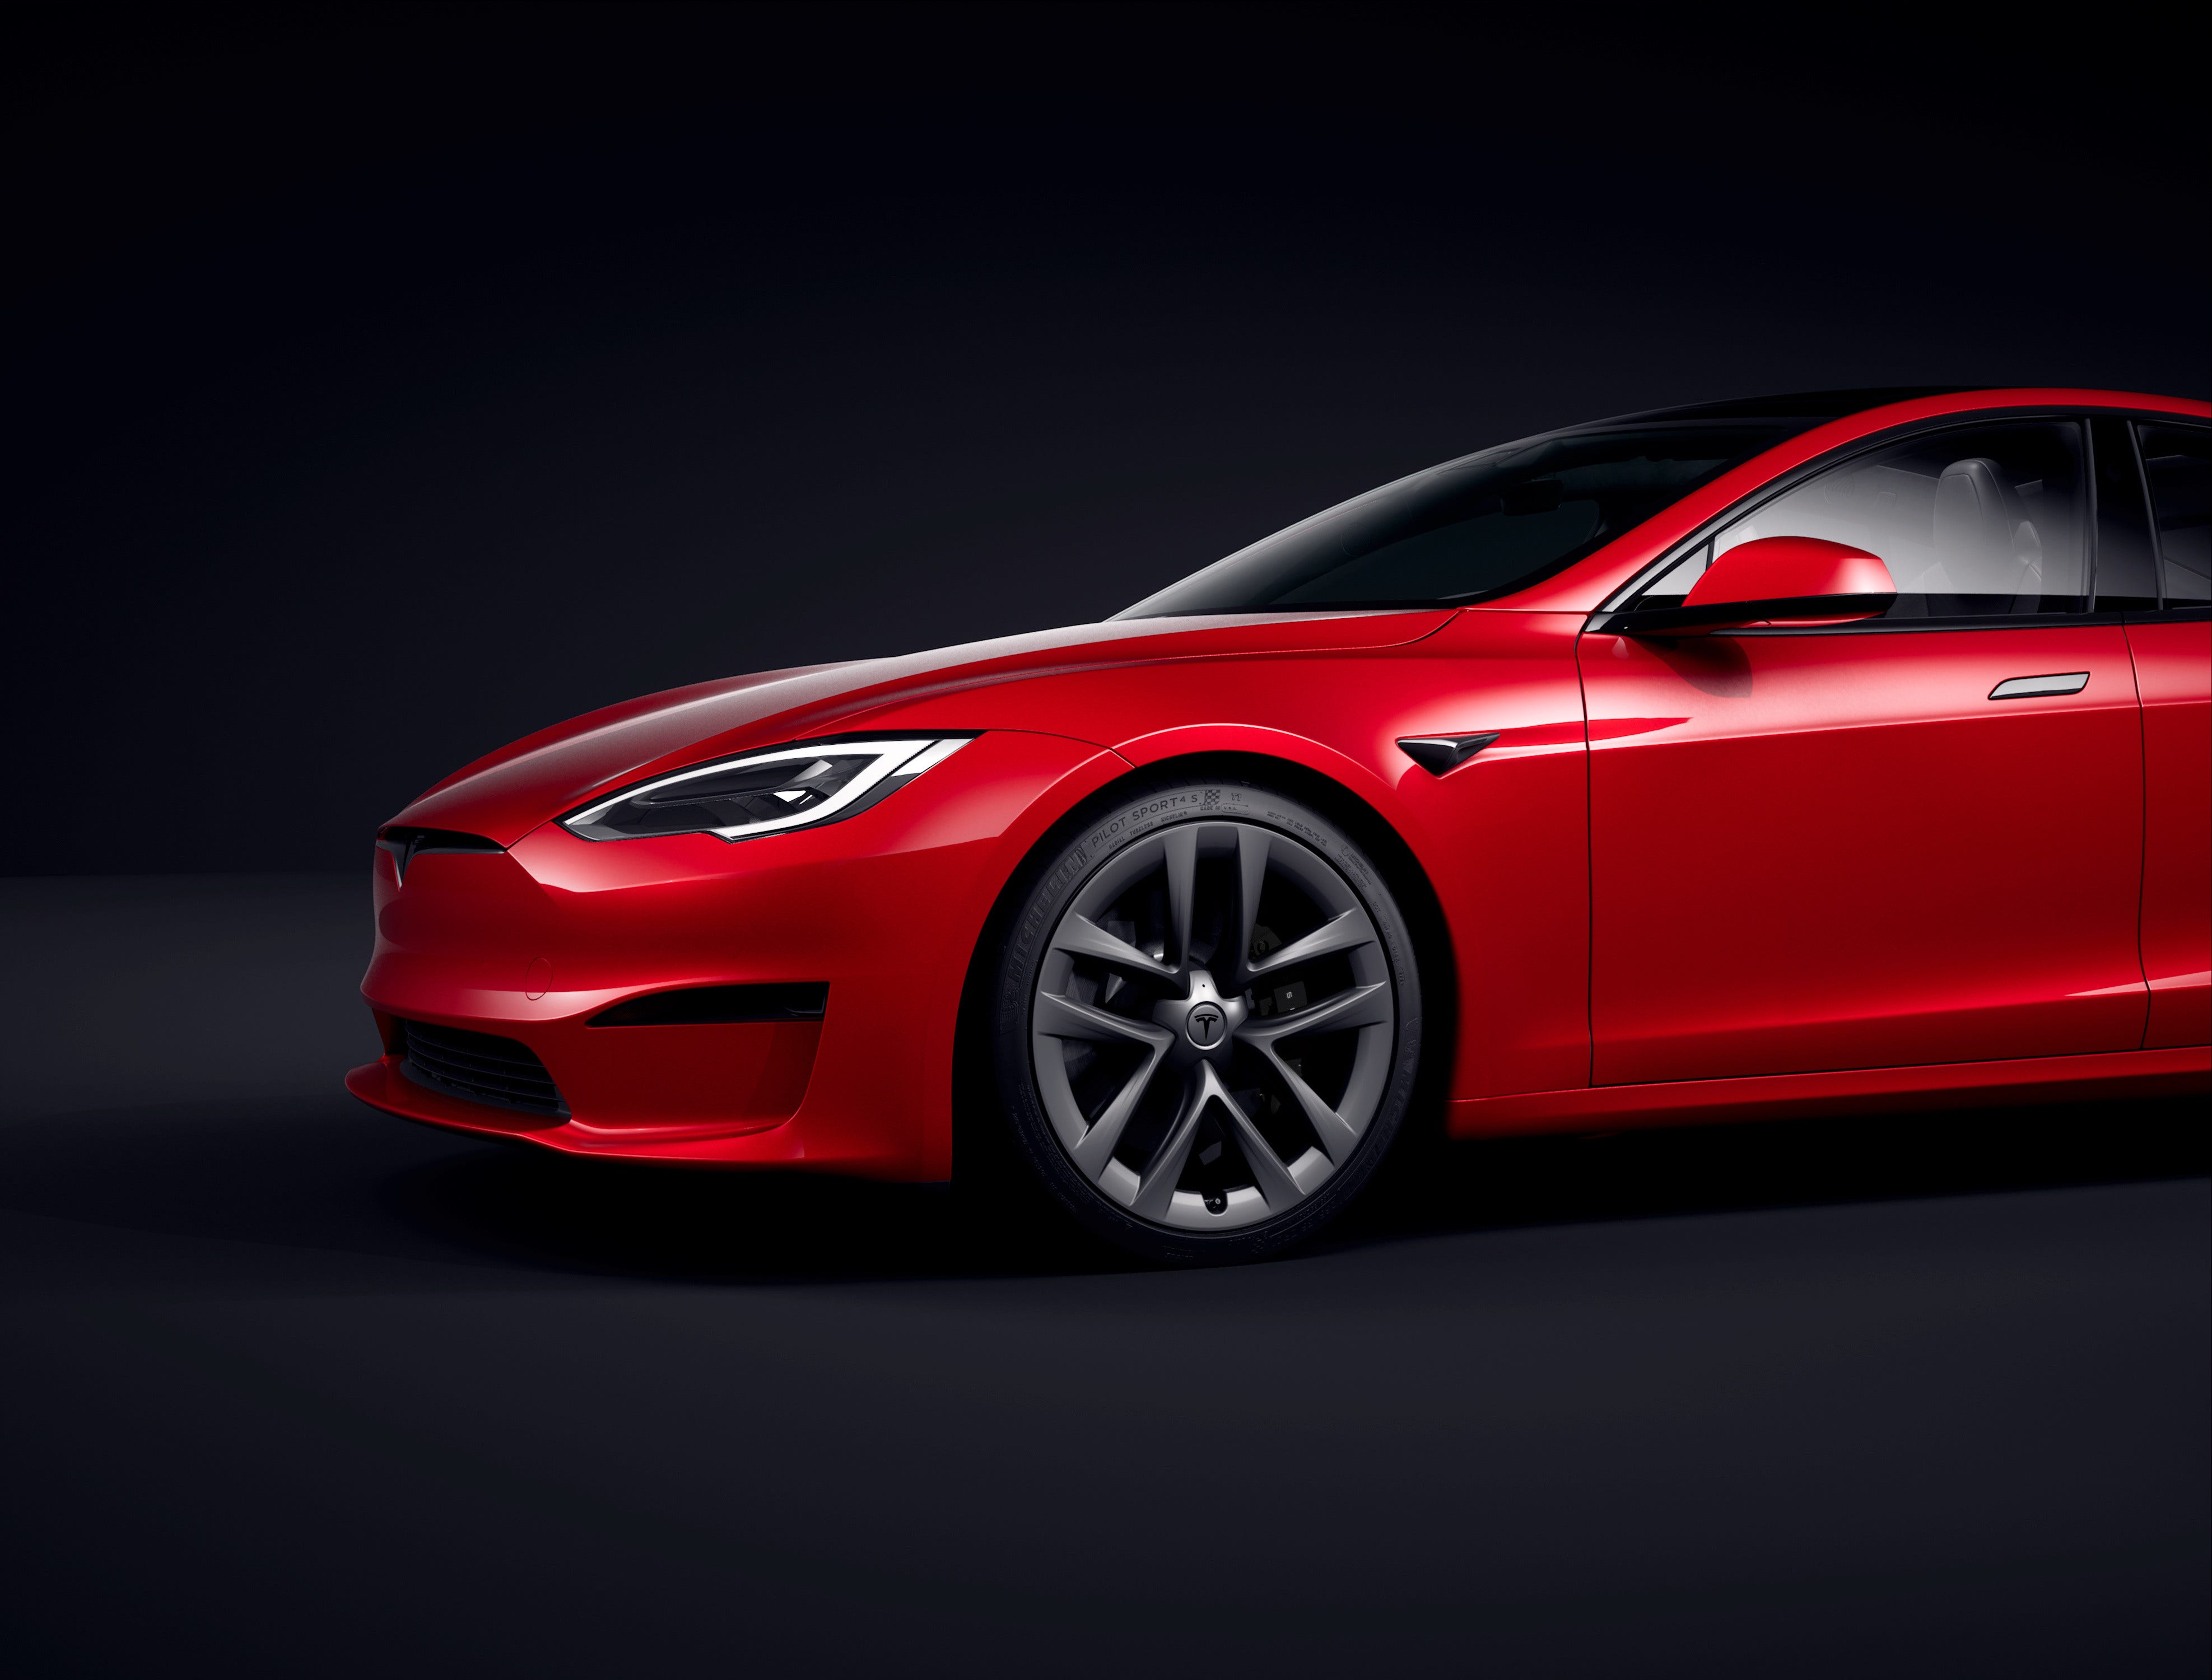 Tesla Removes About 80 Miles Of Customer's Available Battery Capacity Via Software Restriction